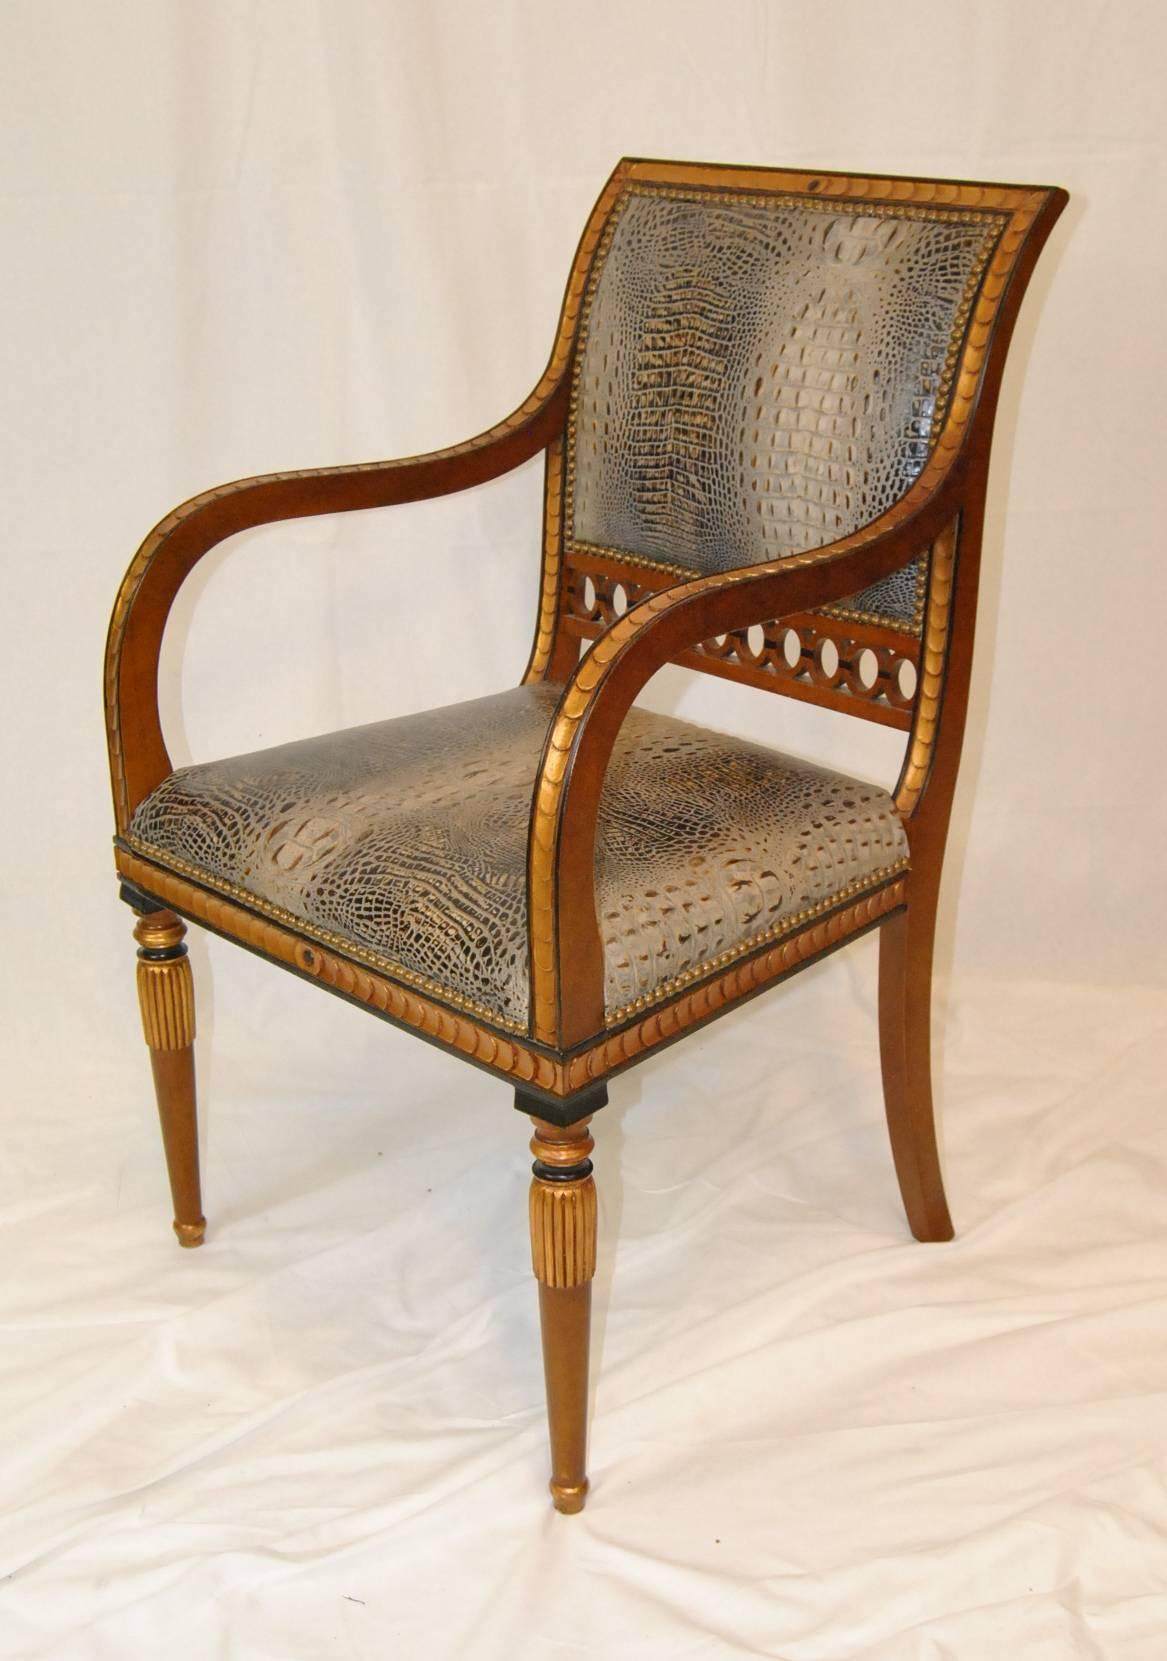 20th Century Pair of Regency Style Arm Chairs in Crocodile Upholstery by Whittemore Sherrill